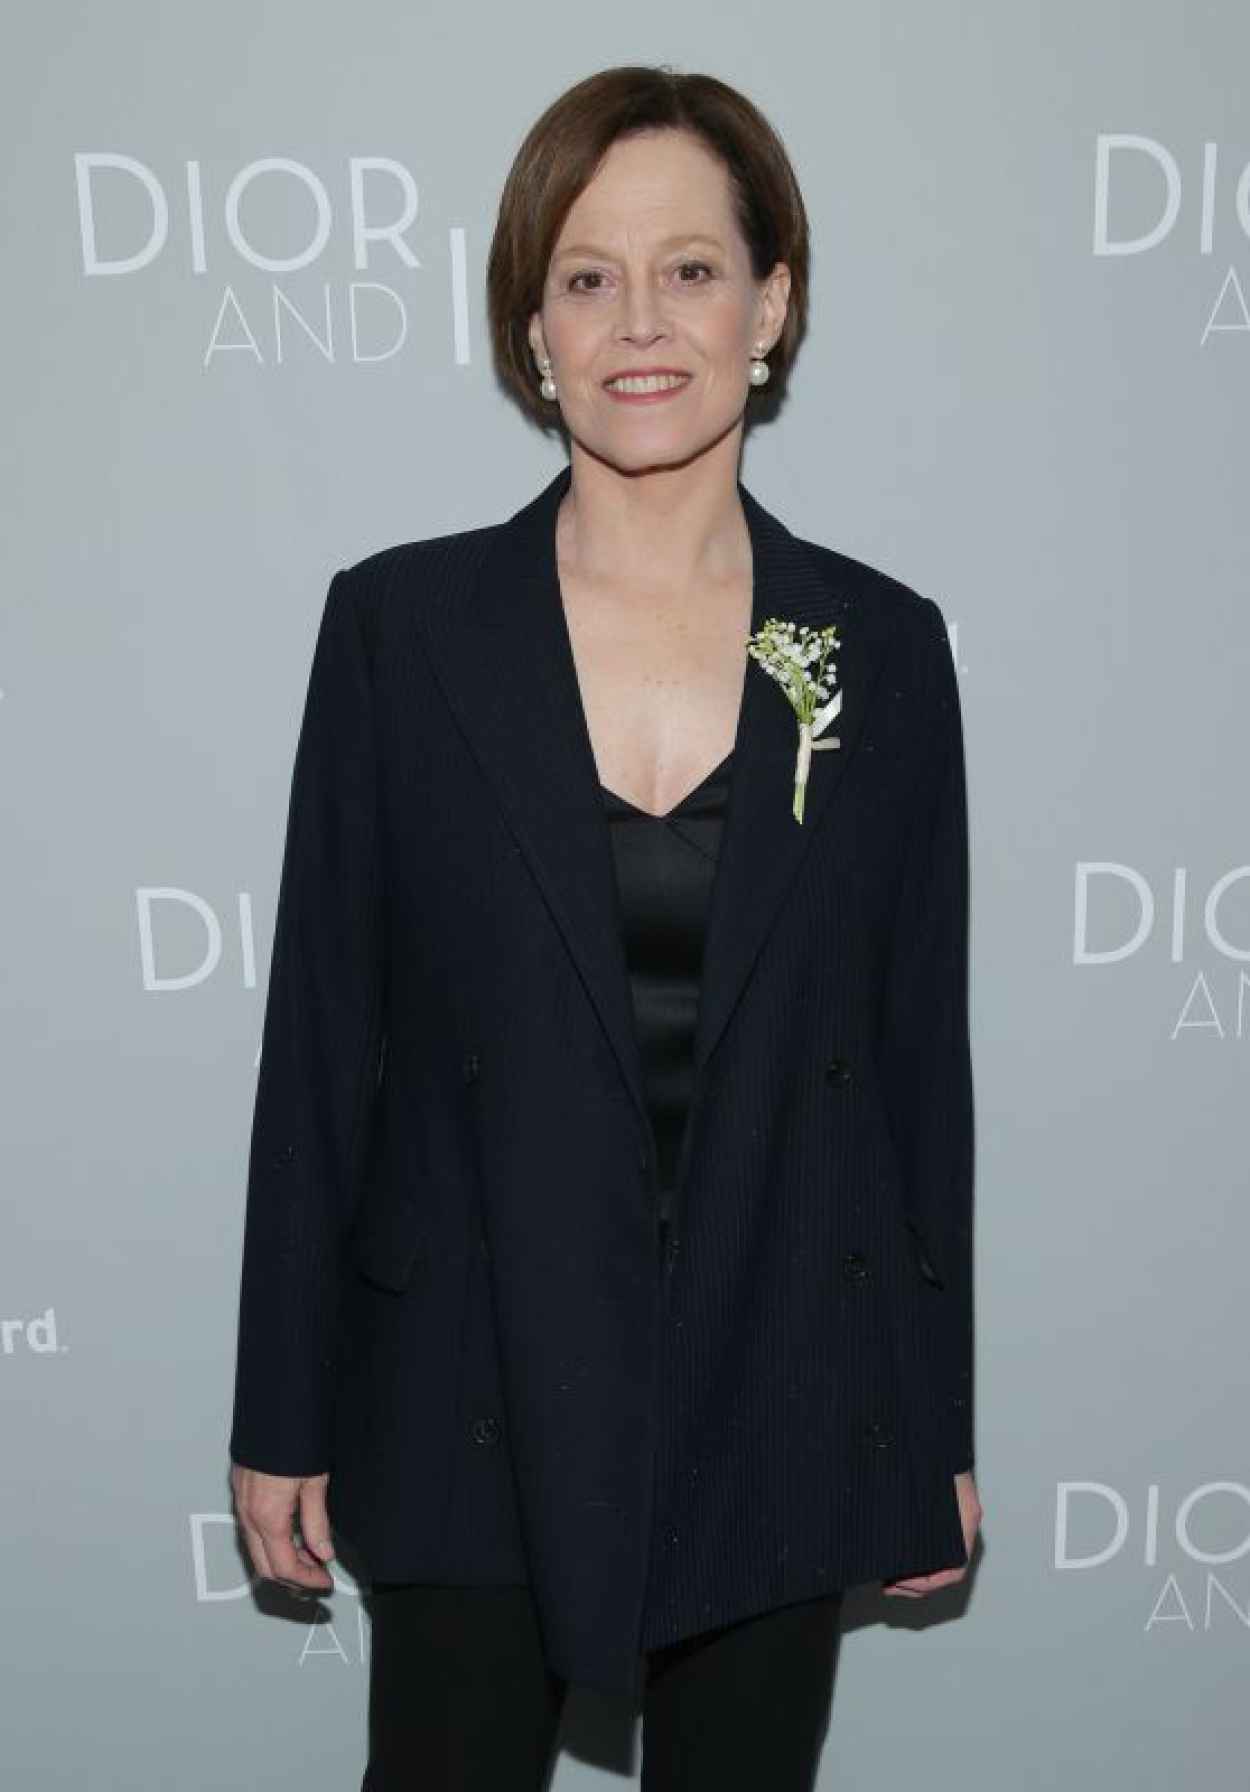 Sigourney Weaver - -The Orchard-s DIOR & I- Screening in New York City-1